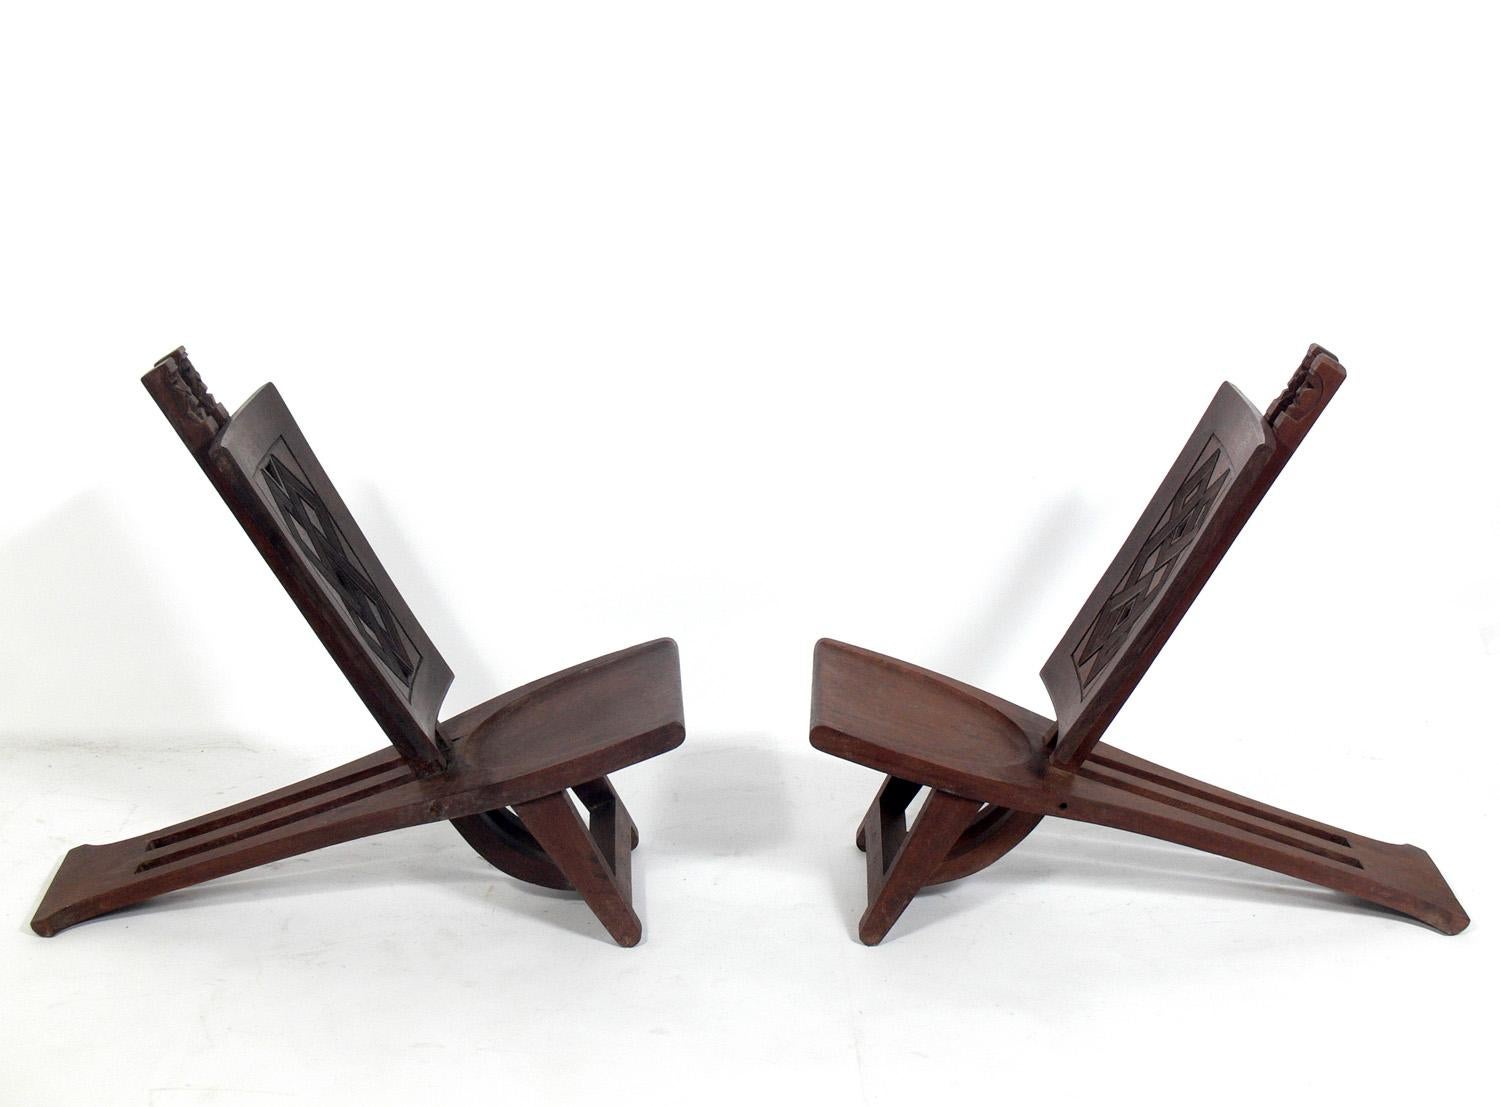 Pair of low slung African lounge chairs, probably from Congol, circa 1960s. Each chair is hand carved and unique and has a slightly different design and dimensions.